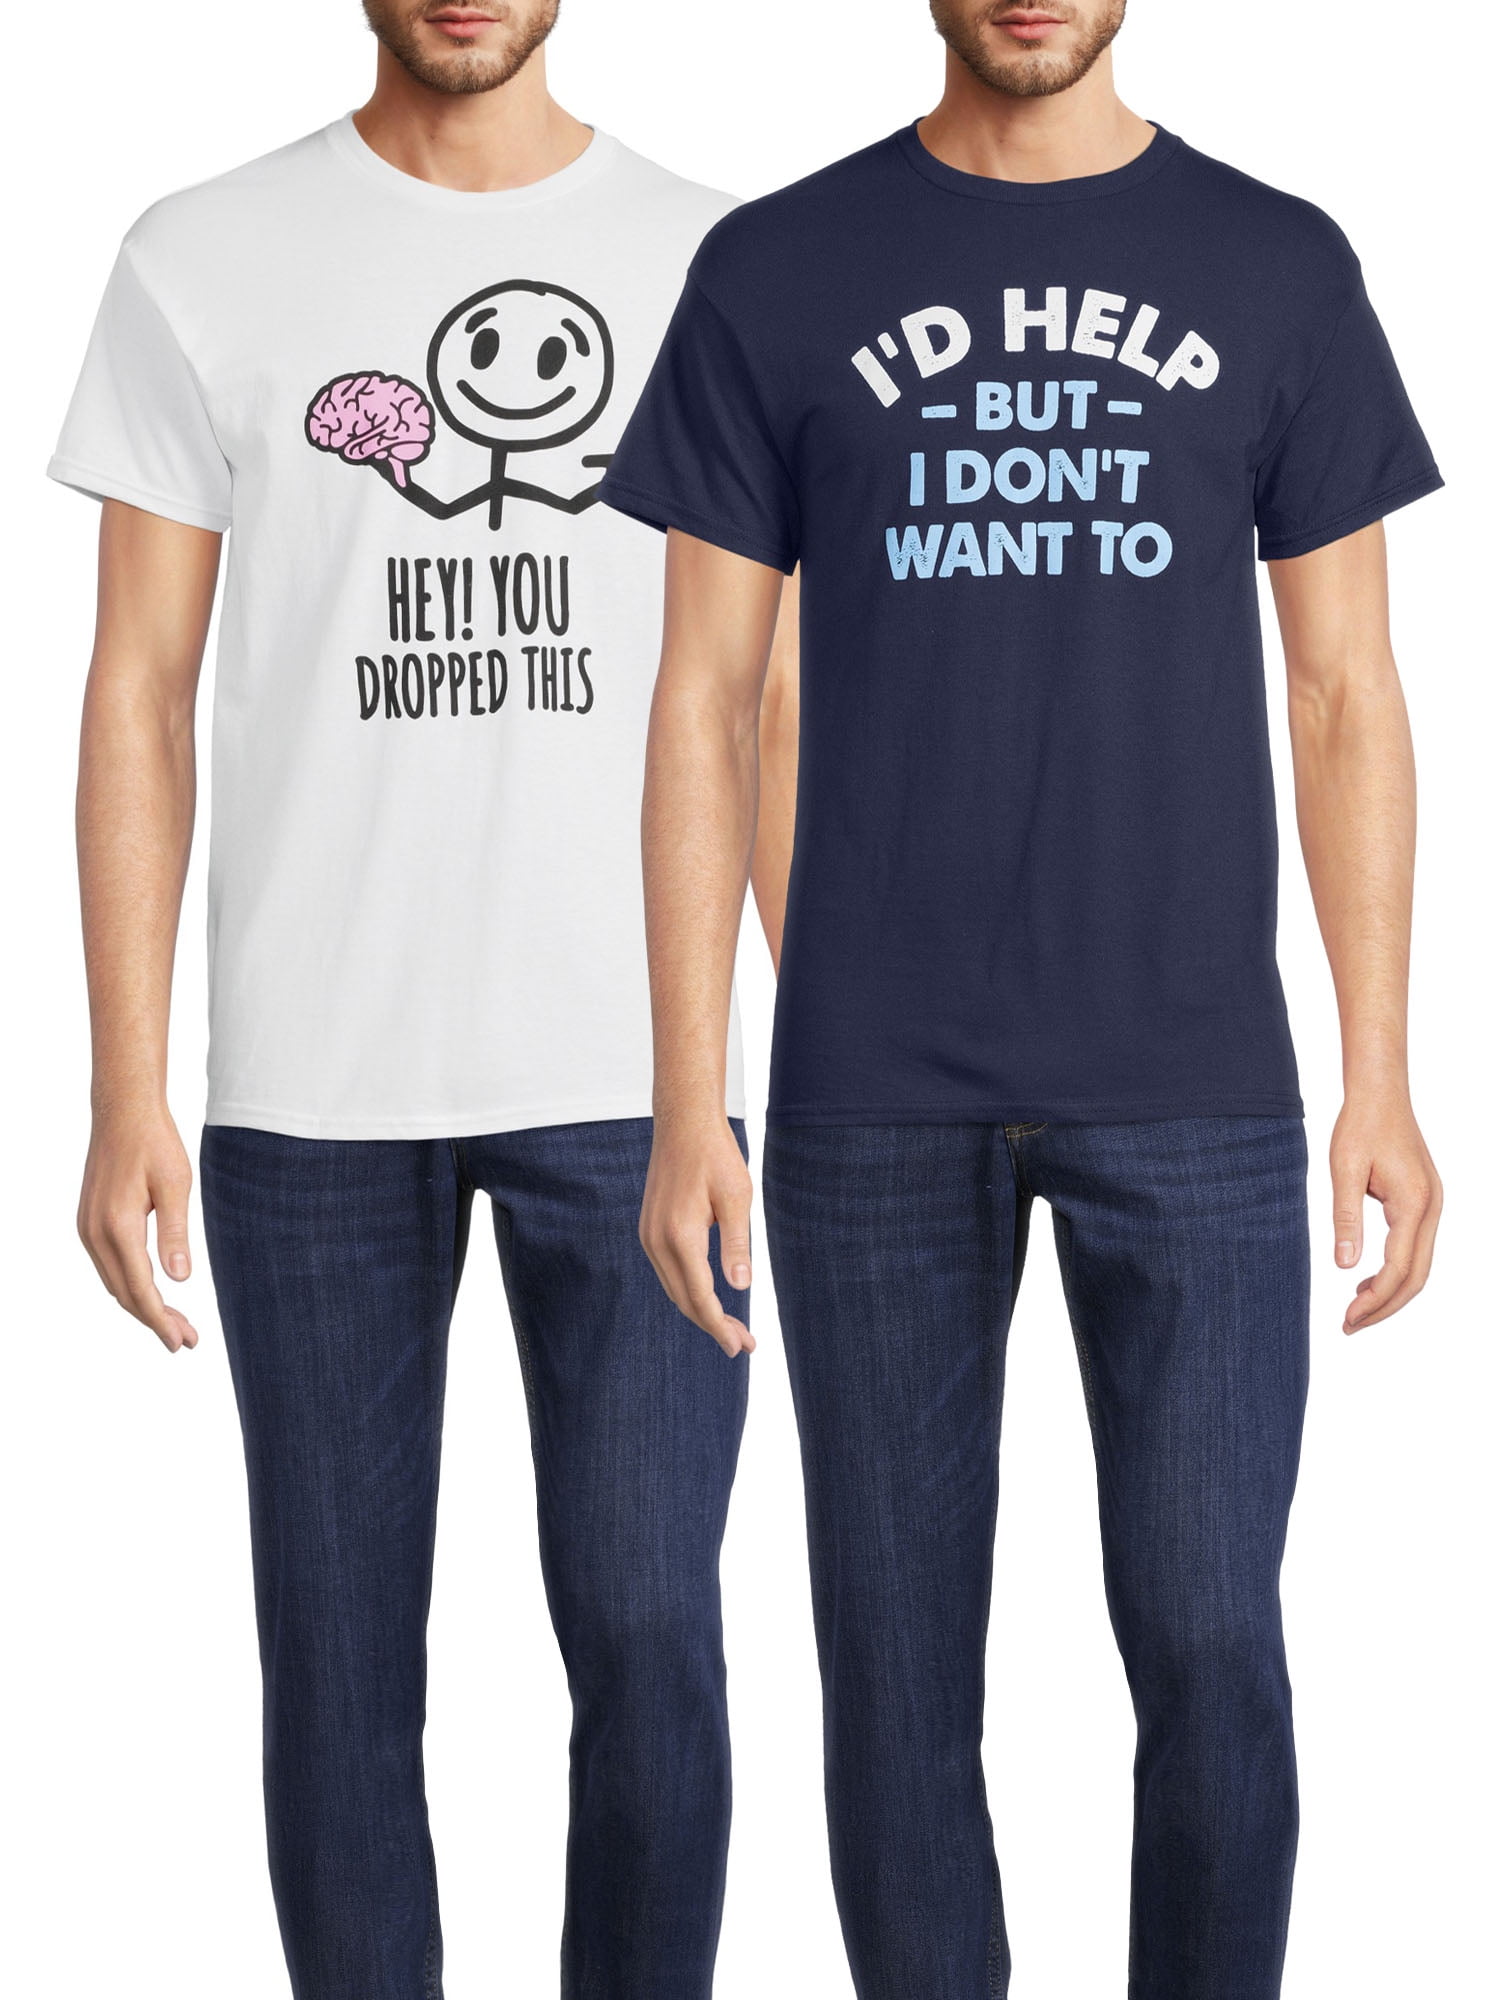 Humor Men's Big Men's You This I Would Help Graphic T-Shirt, 2-Pack -